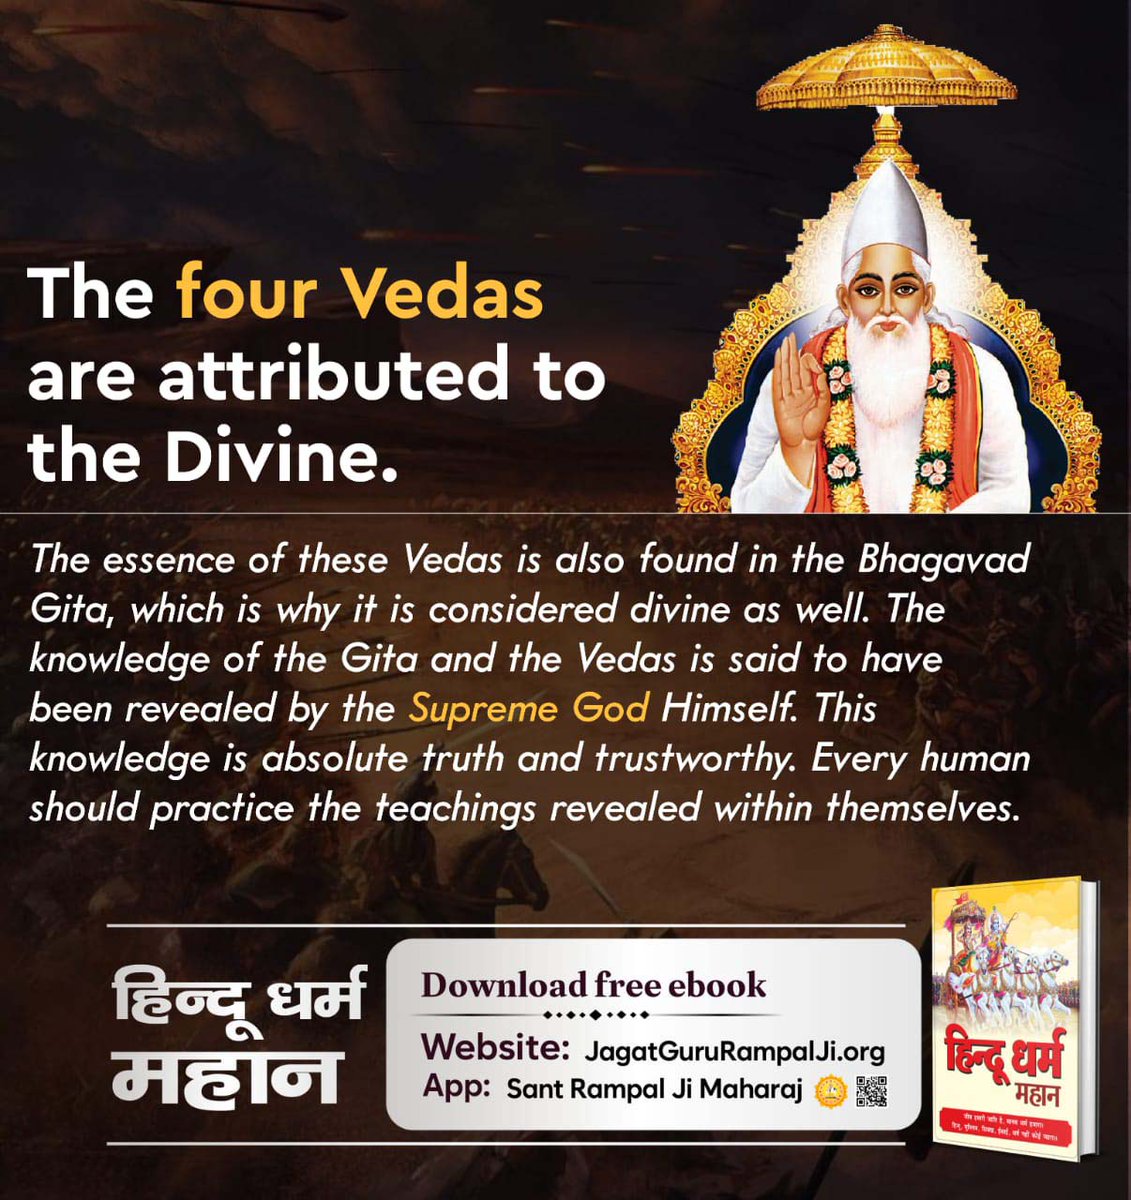 #GodMorningFriday 
#FridayThoughts 
 The foundation of Sanatan Dharma rests upon the holy Vedas and the divine Bhagavad Gita. Following the principles outlined in these scriptures leads one to a path of righteousness.
 #आओ_जानें_सनातन_को